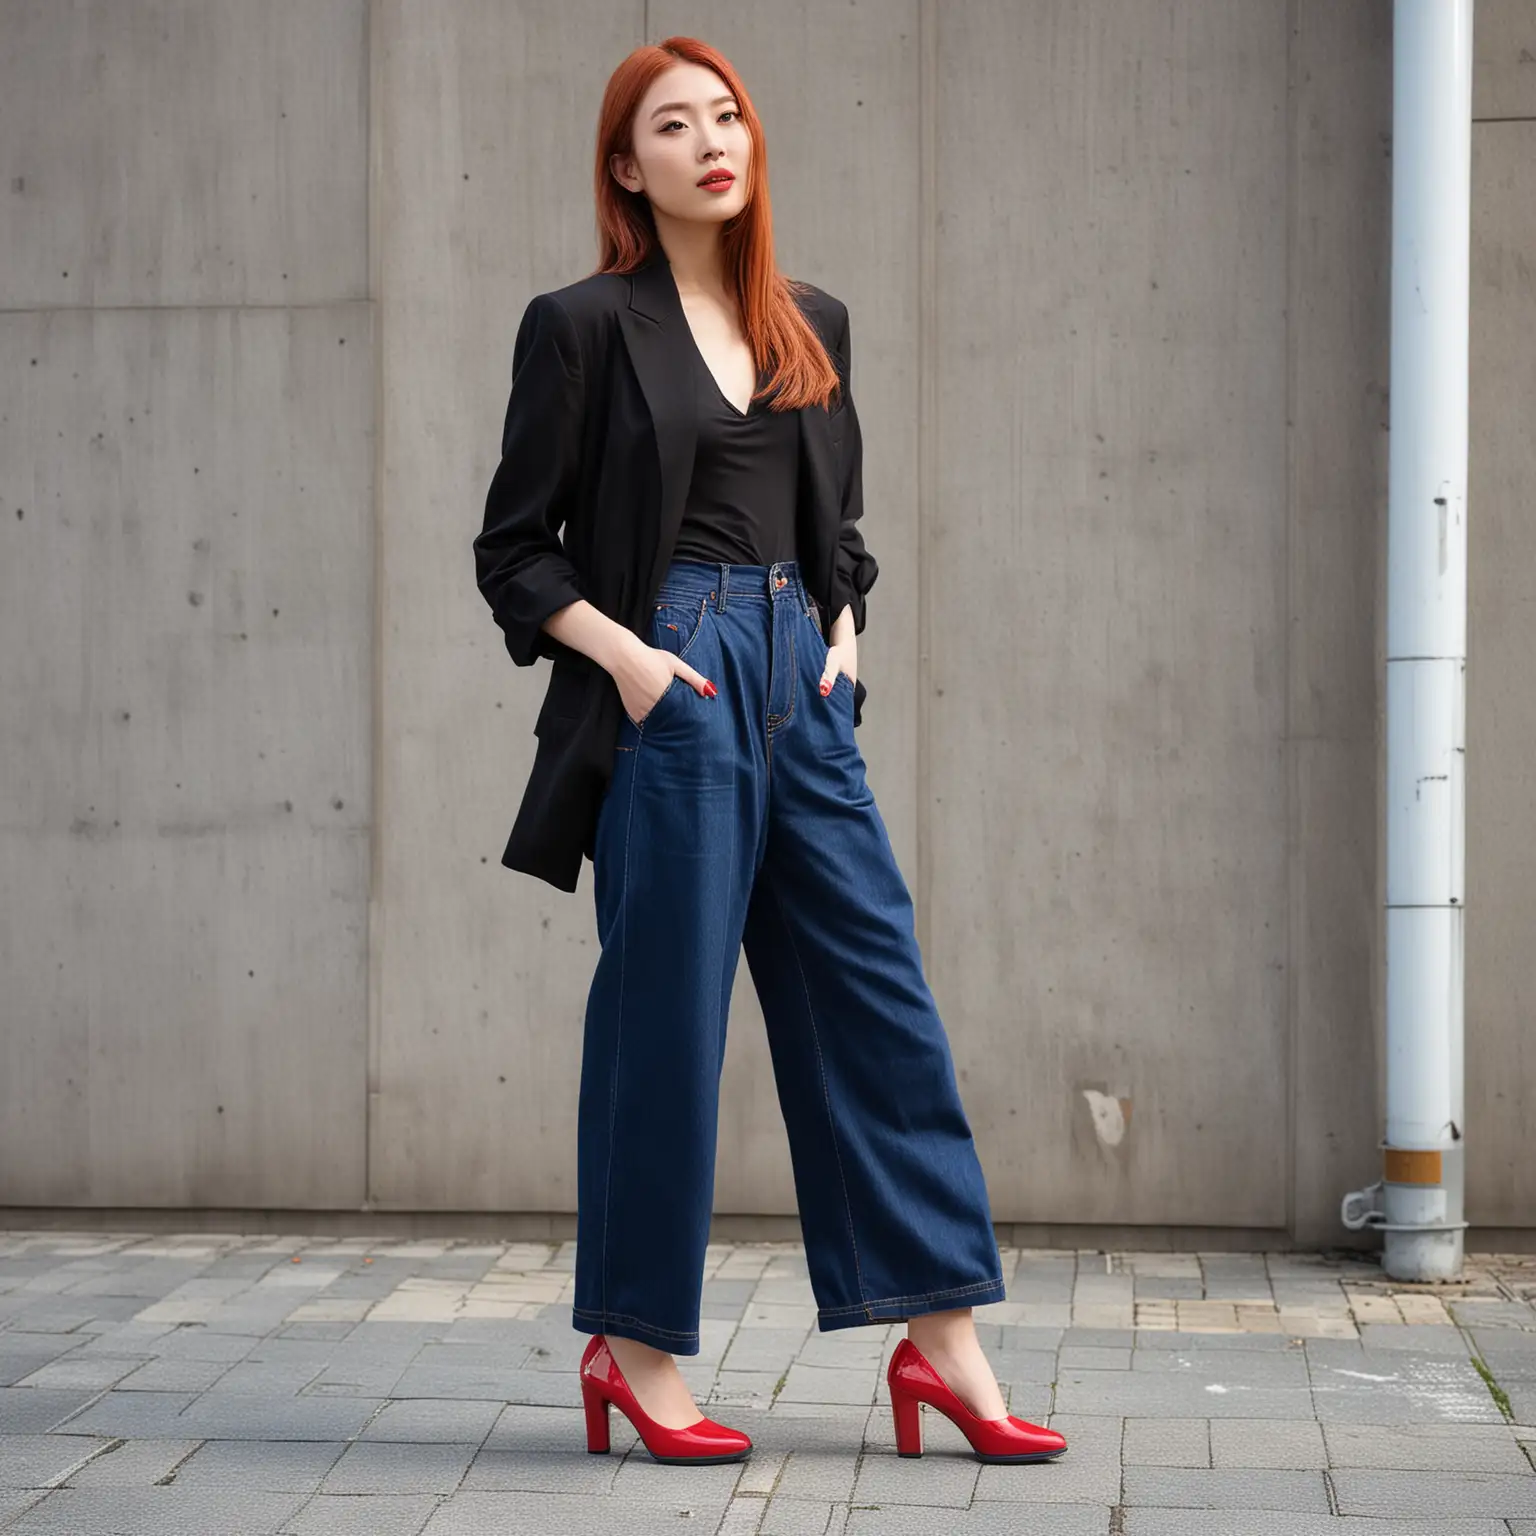 oversized black blazer with red high heels and blue wide leg jeans, in Japan